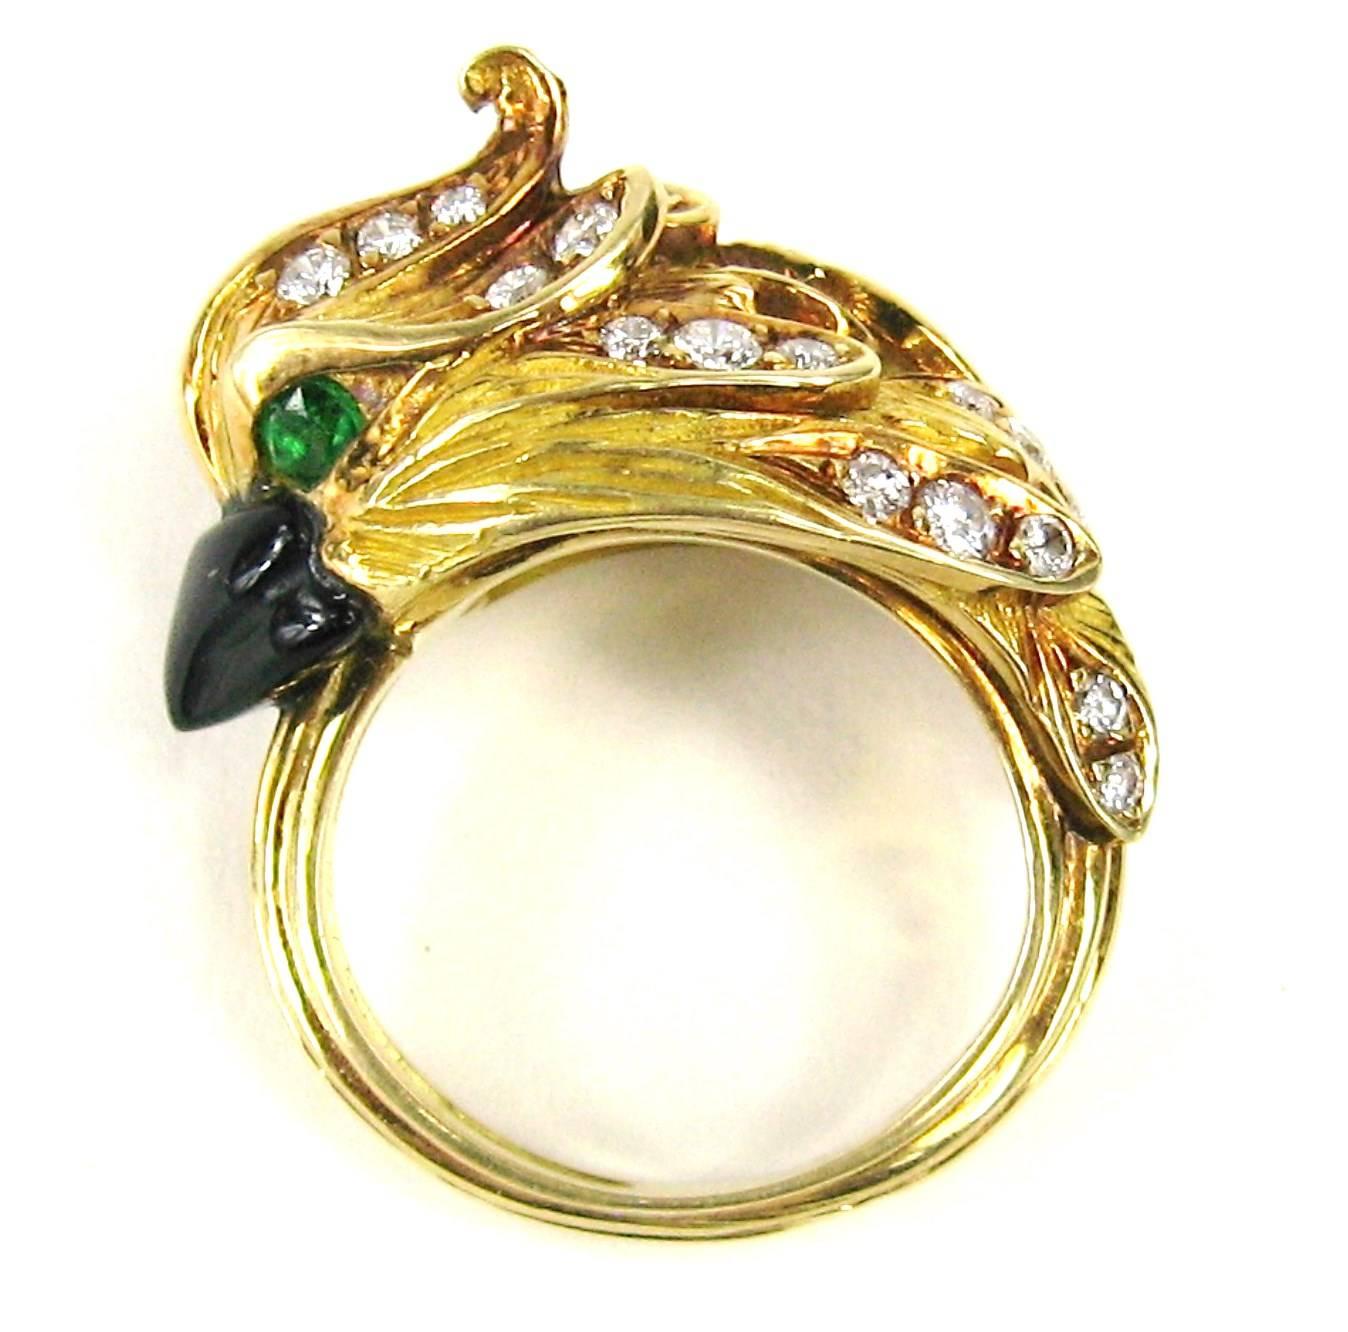 Stunning 18K Yellow gold Bird ring. The workmanship on this is exquisite. Hallmark is illegible, but I have more from this estate and this is possibly French  Bright clean diamonds scattered over the top of the birds head. Approximately a carat of